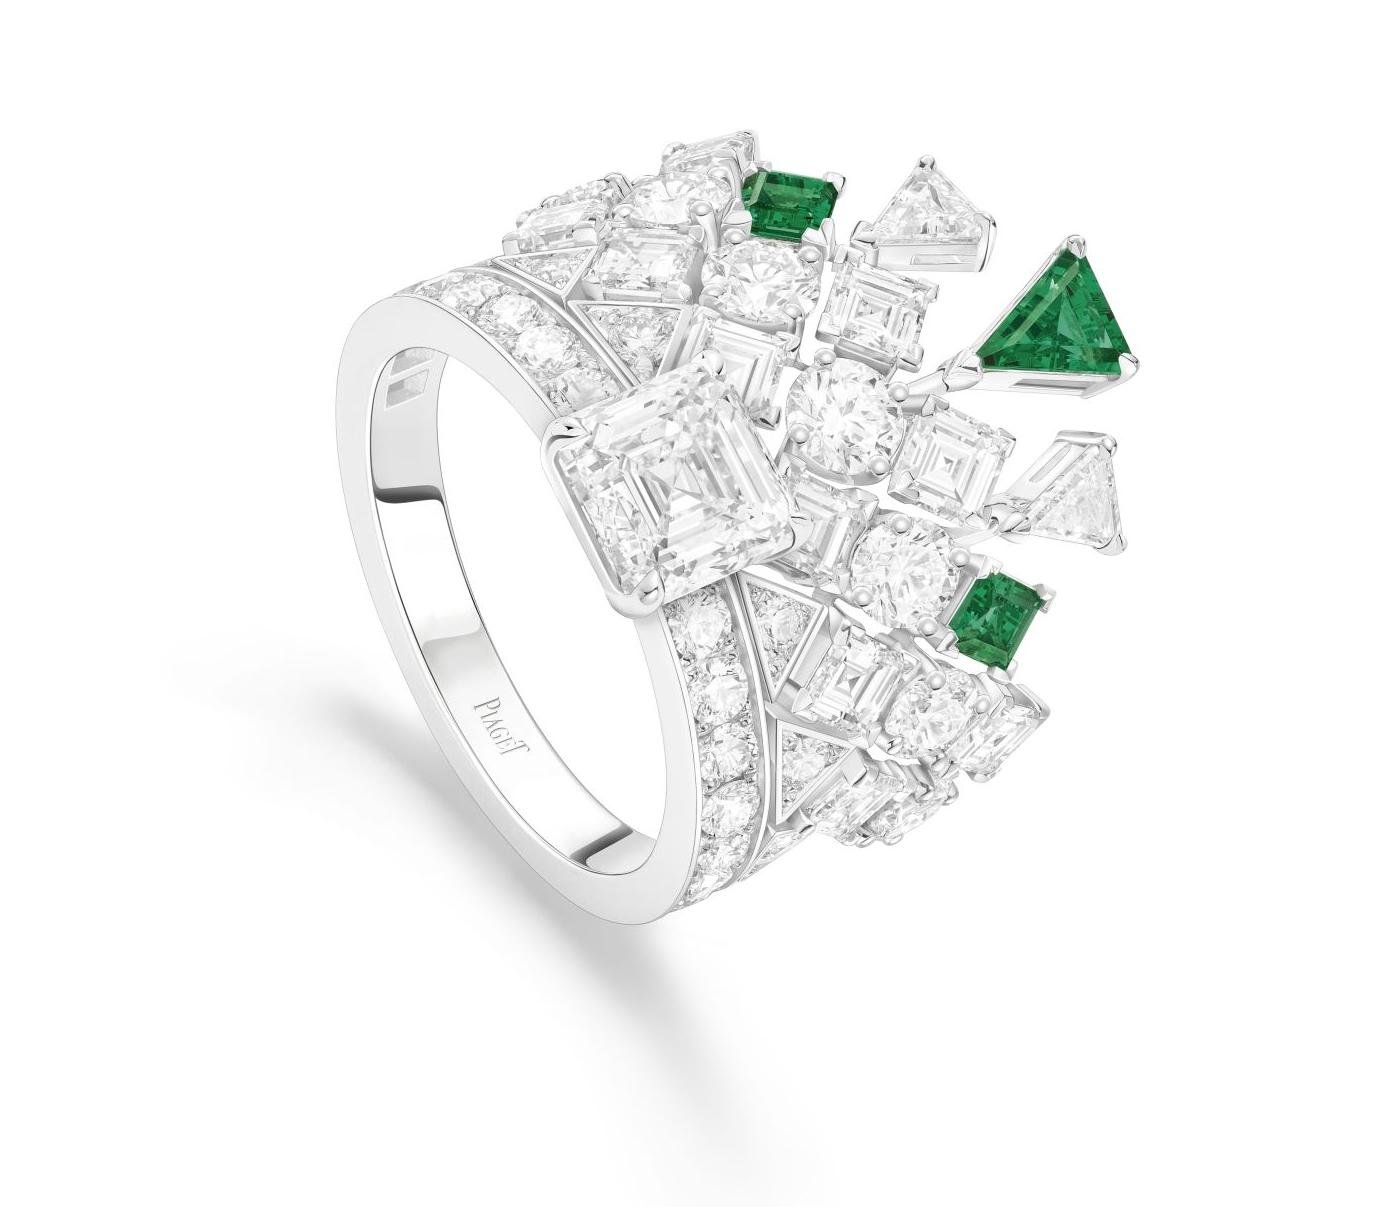 Ring by Piaget